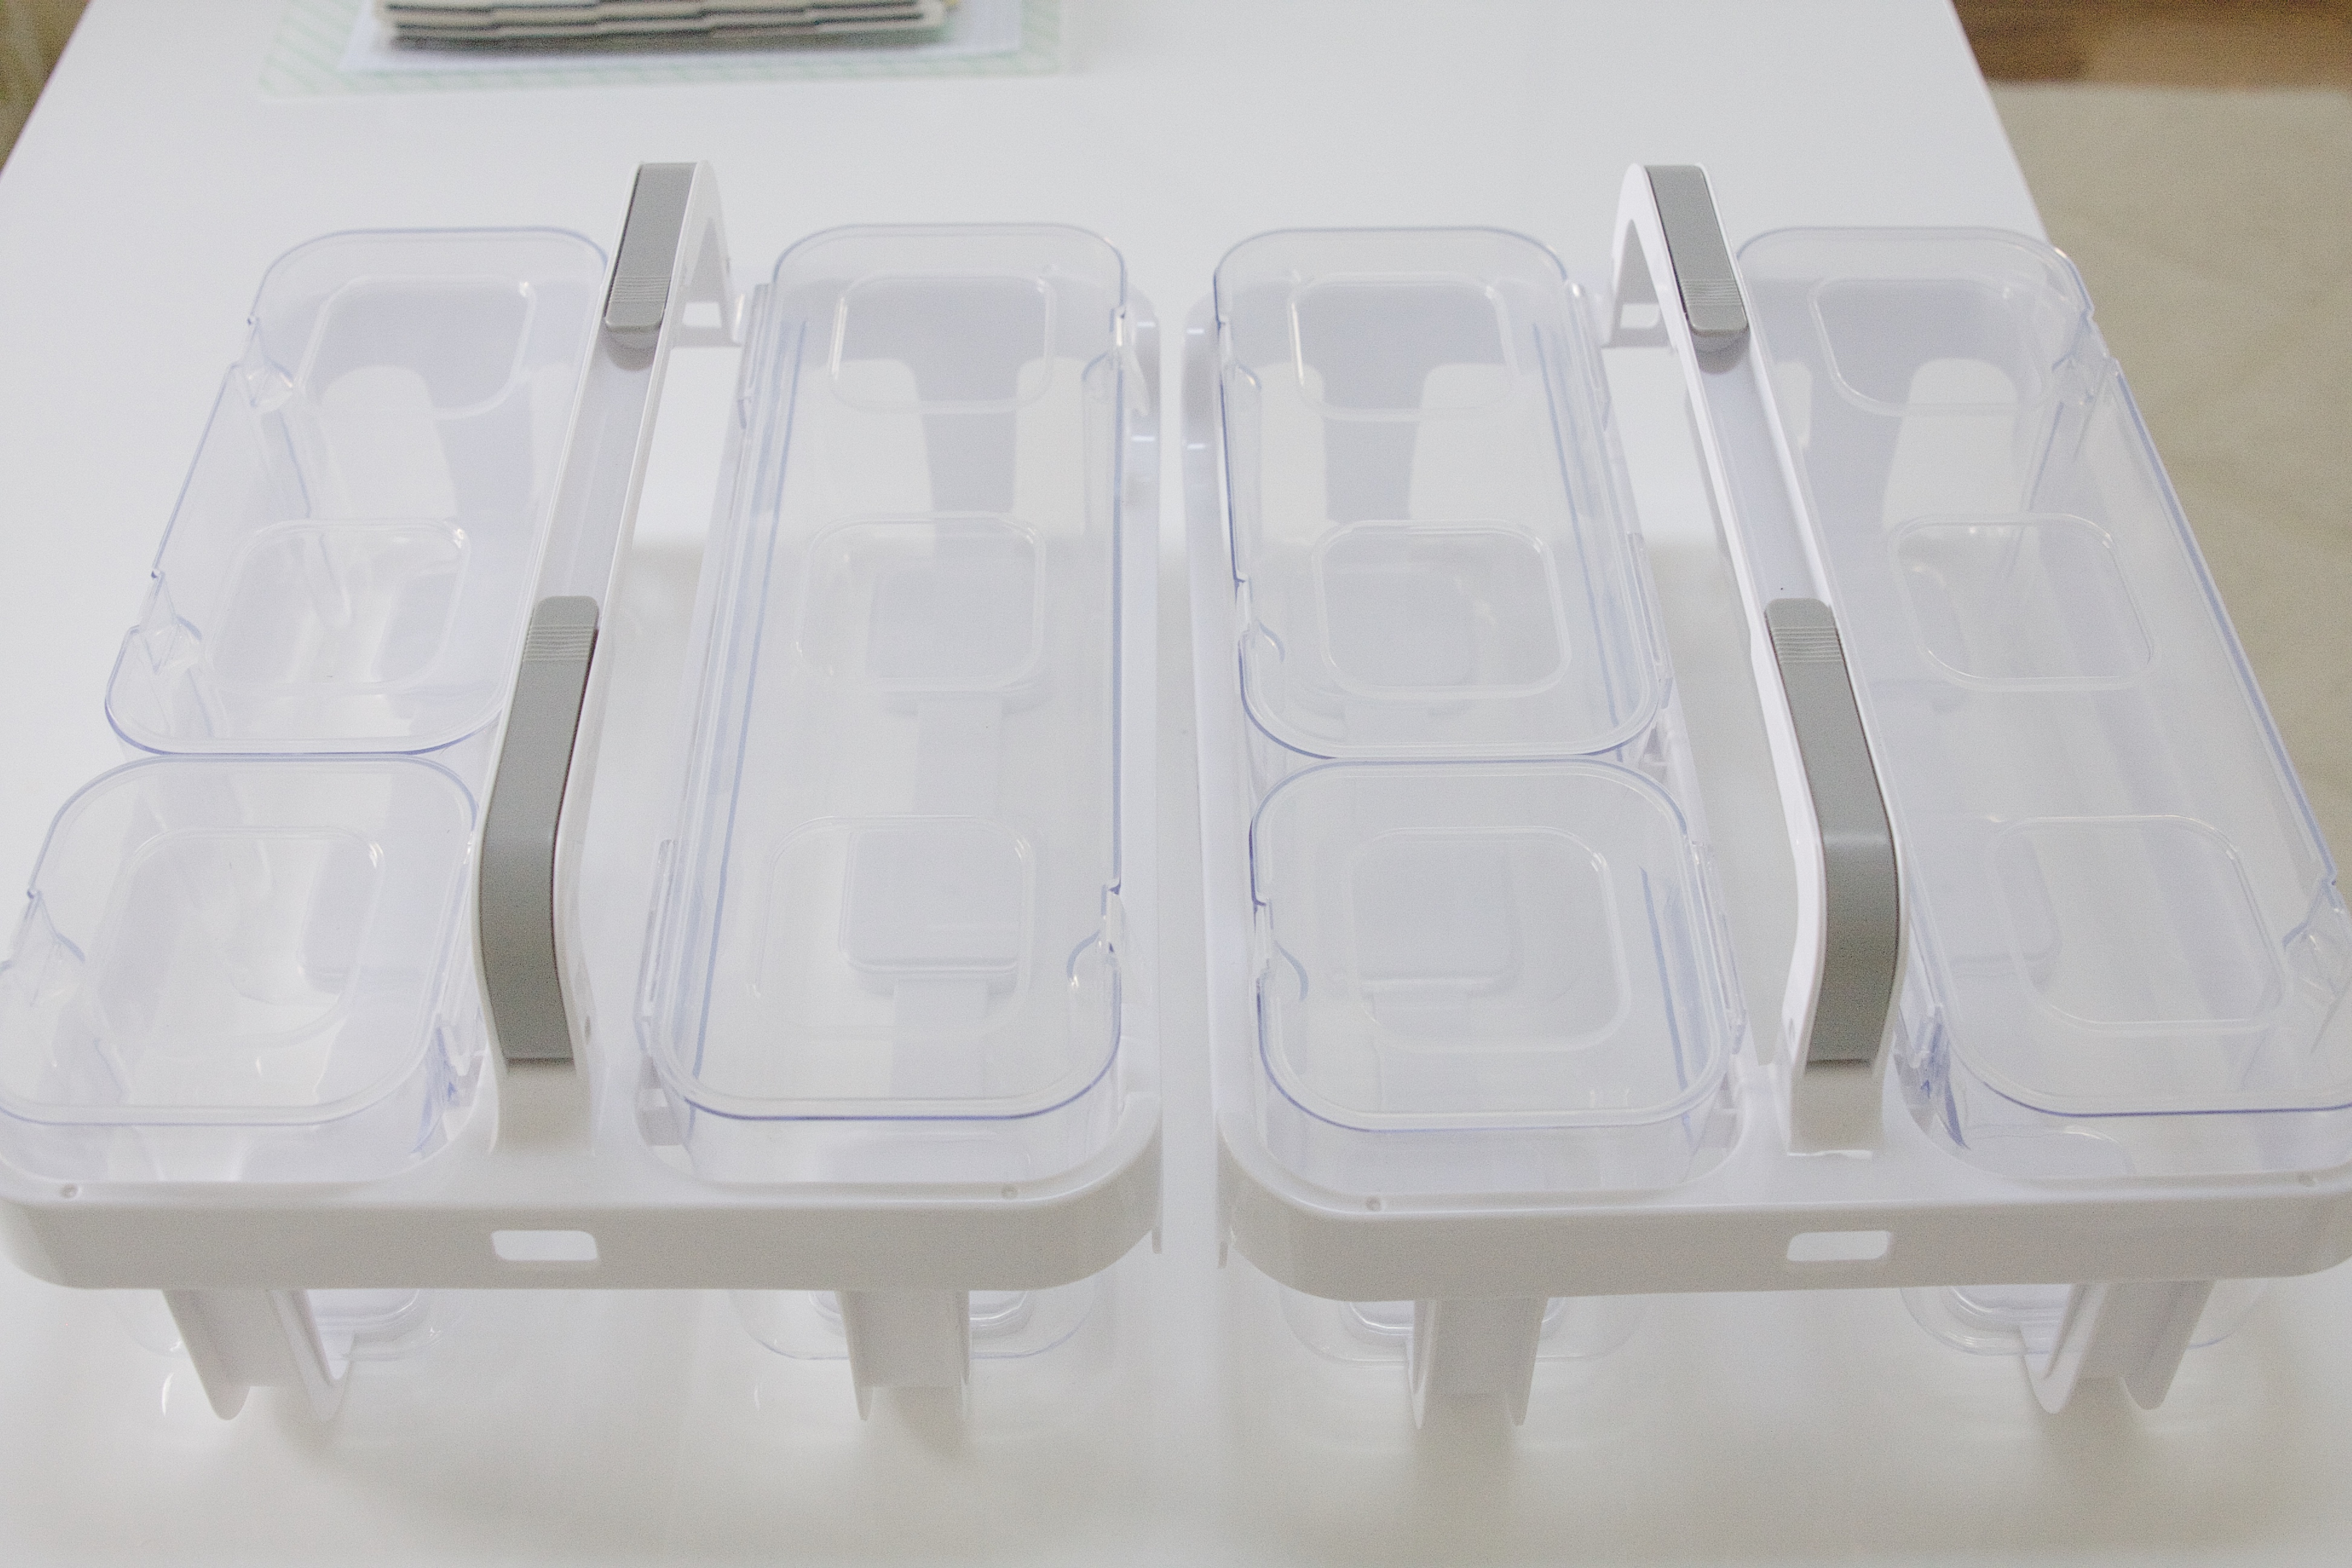 Deflecto Large Caddy Compartment Organizer